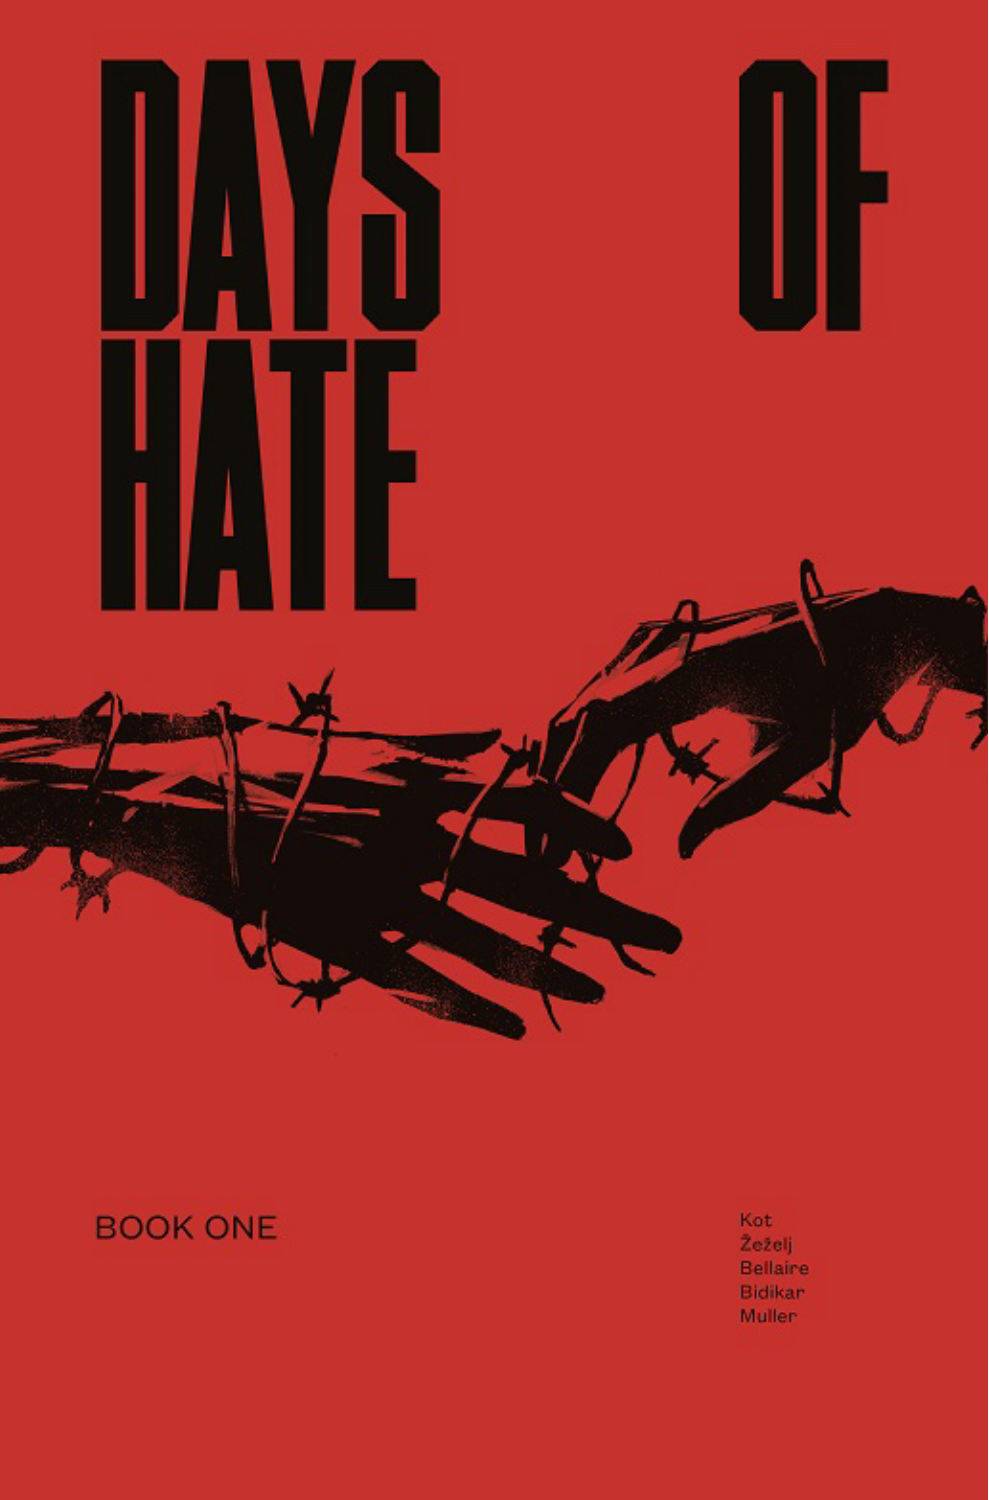 DAYS OF HATE TP VOL 01 (MR)